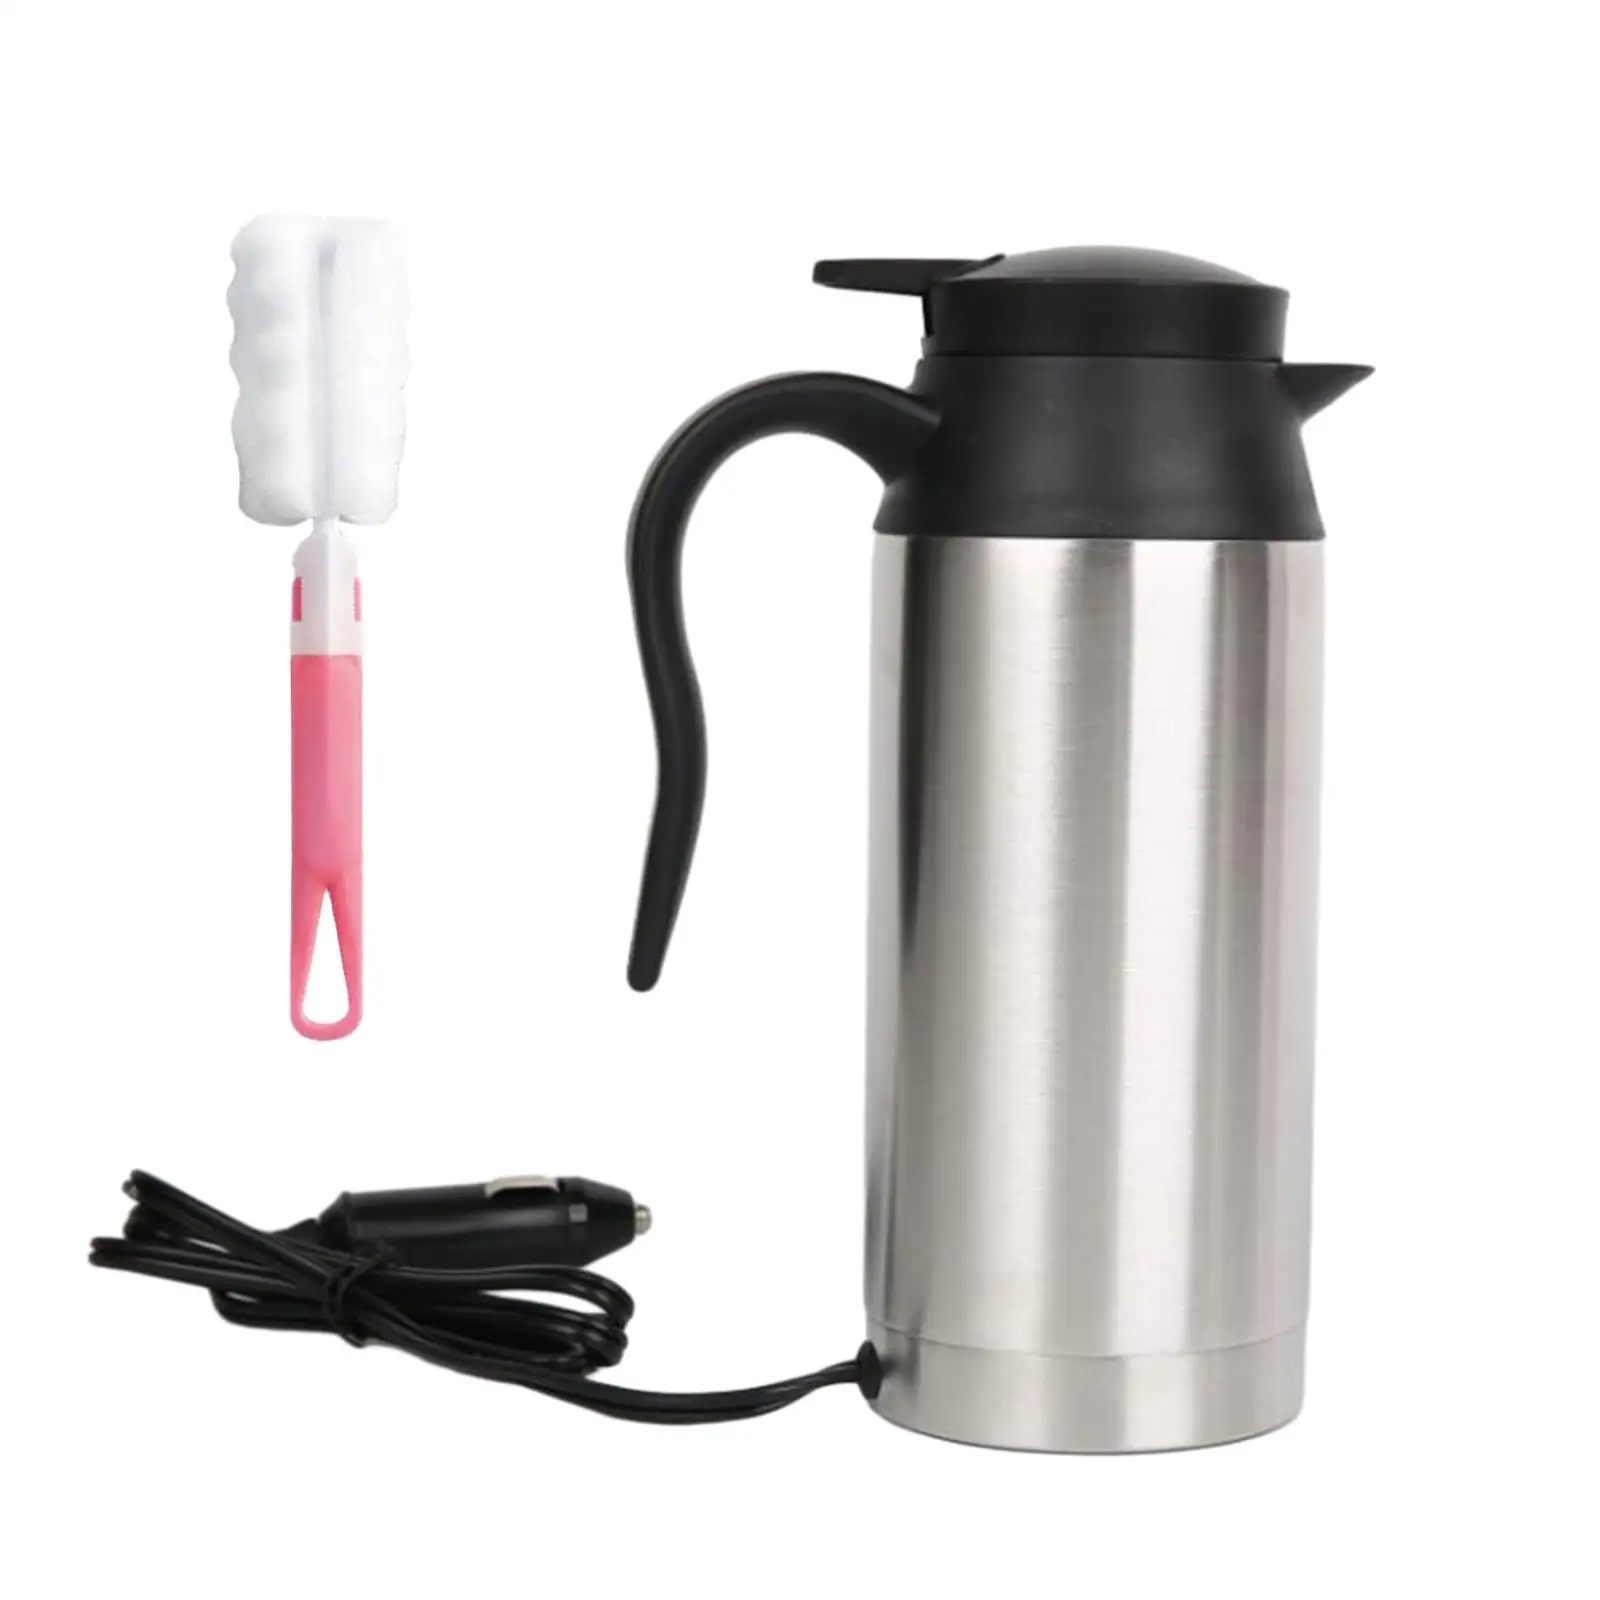 Car Travel Kettle for Boiling Water, Eggs, Coffee, Tea Lorry Truck Heater Bottle Pot for Car Driving Tour Drivers Truck